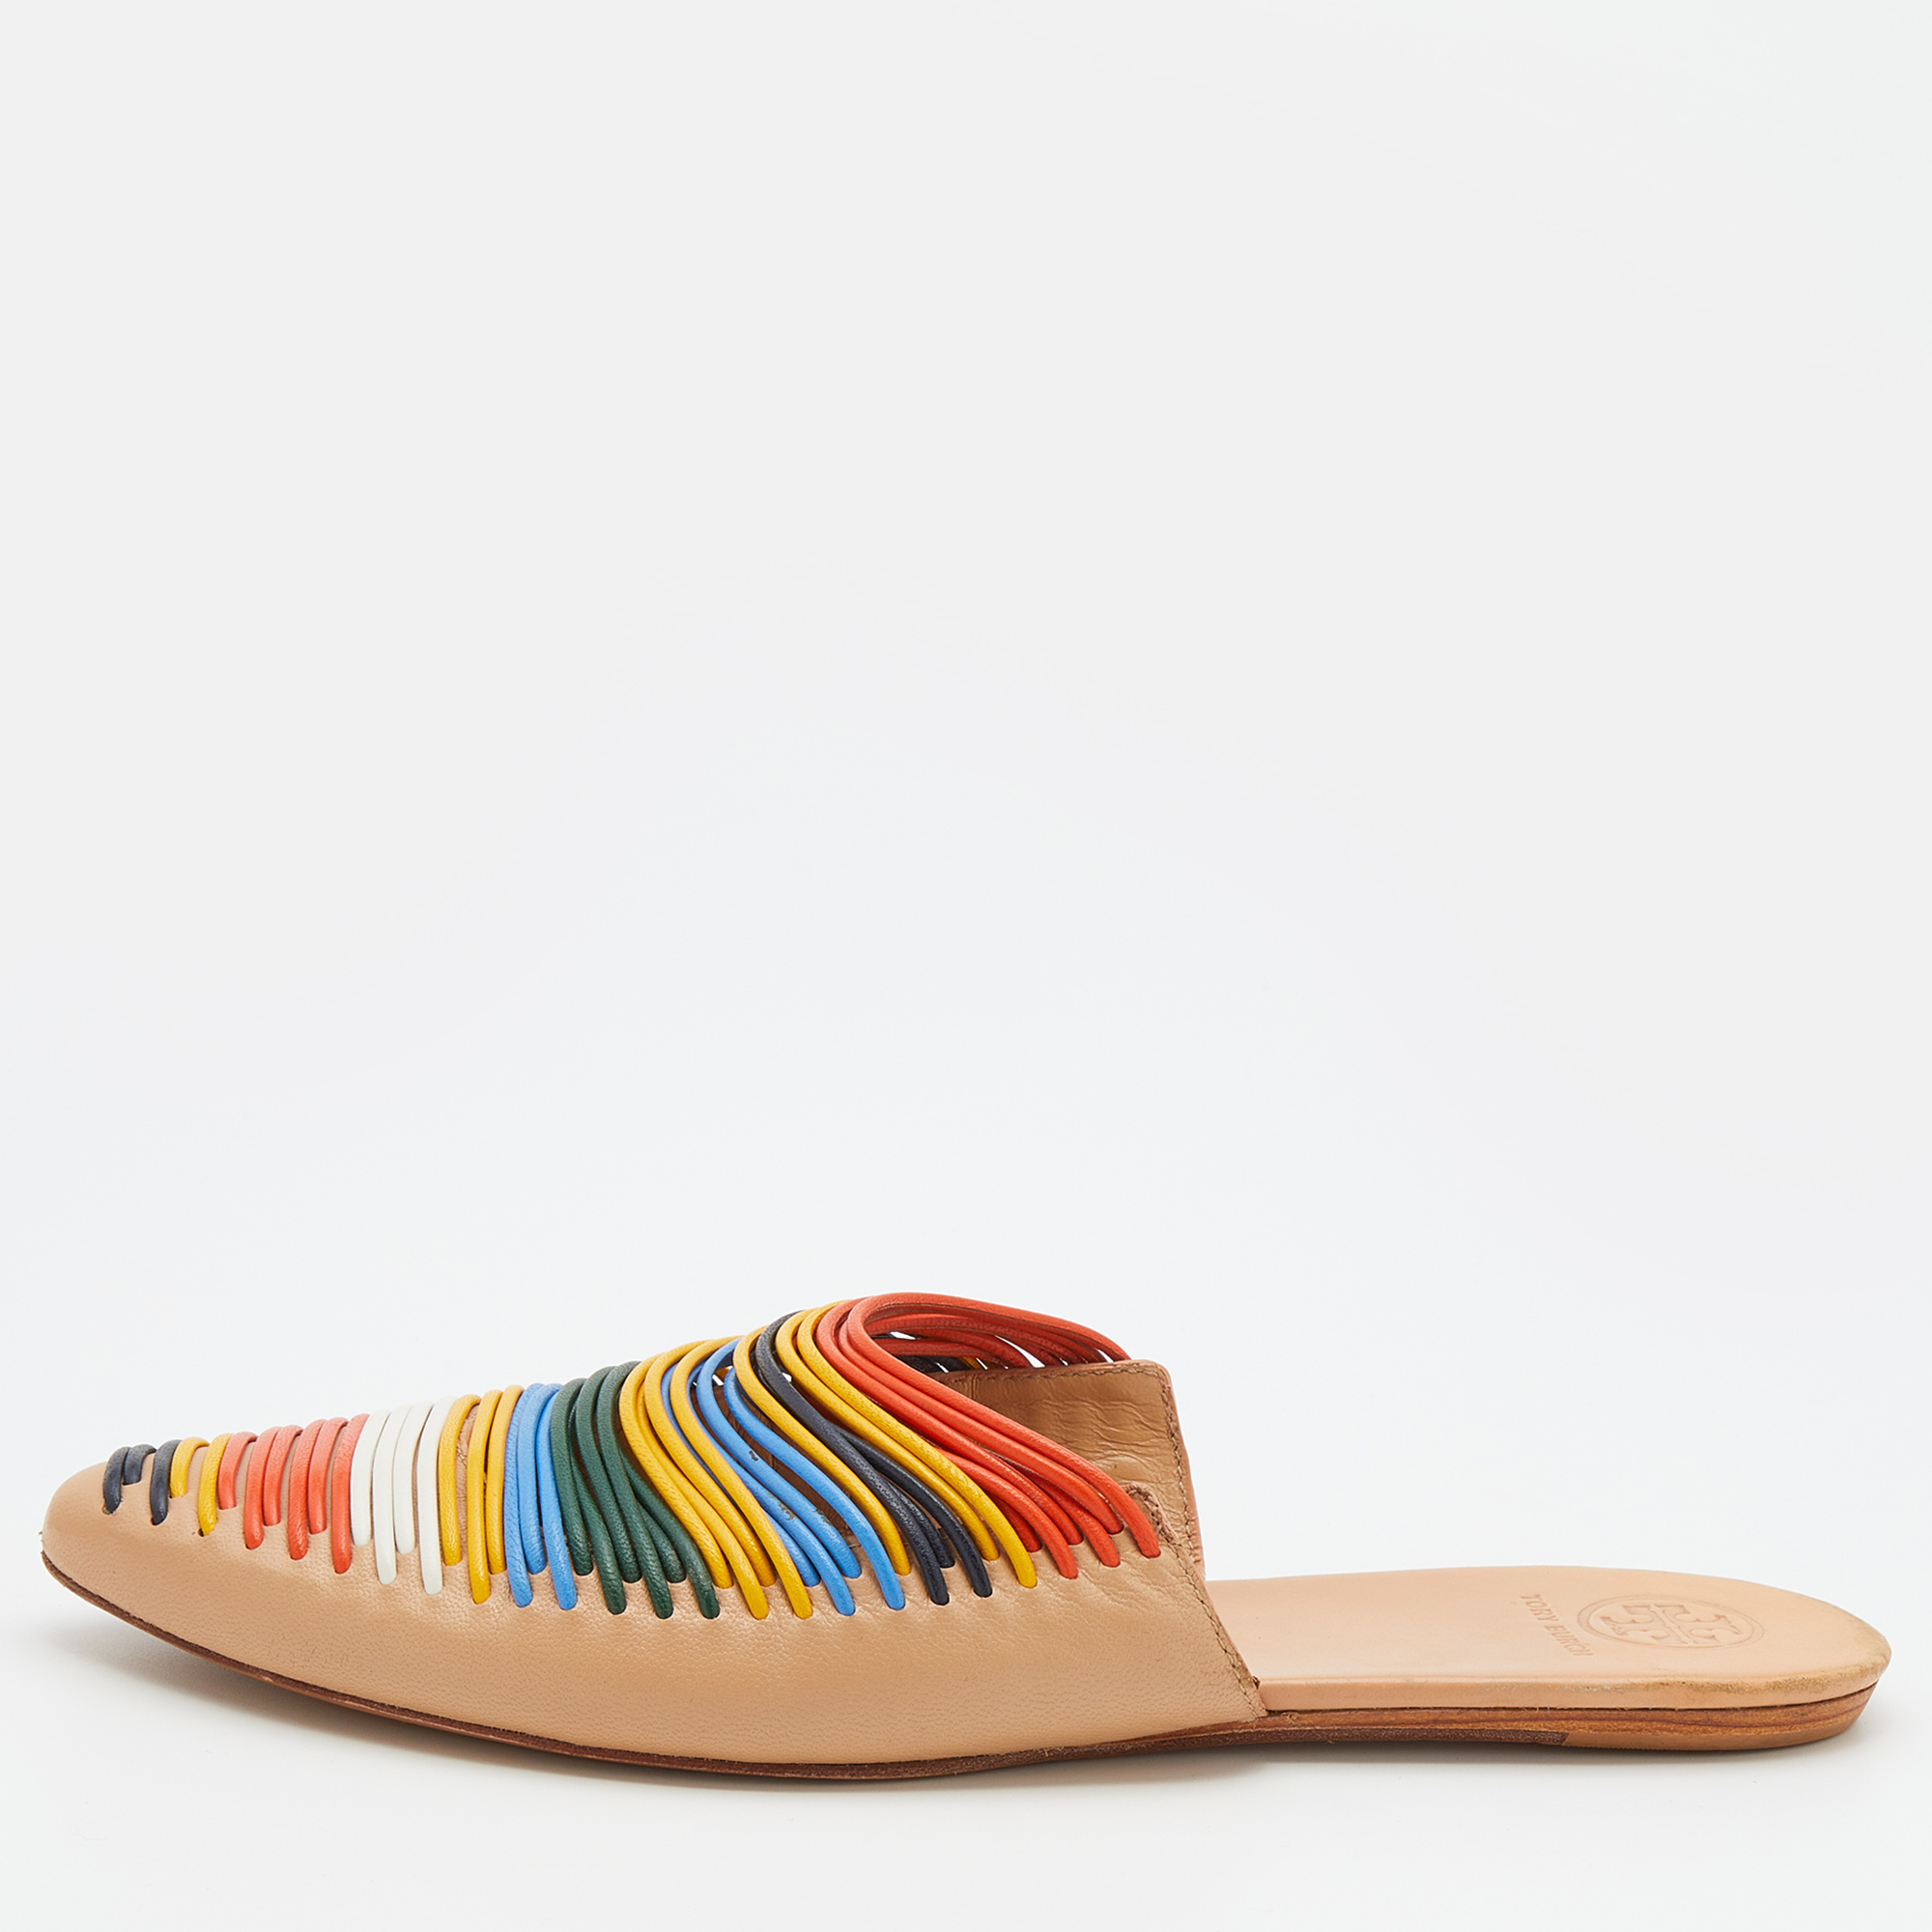 Tory Burch Multicolor Leather Rainbow Sienna Flat Mules Size 37.5